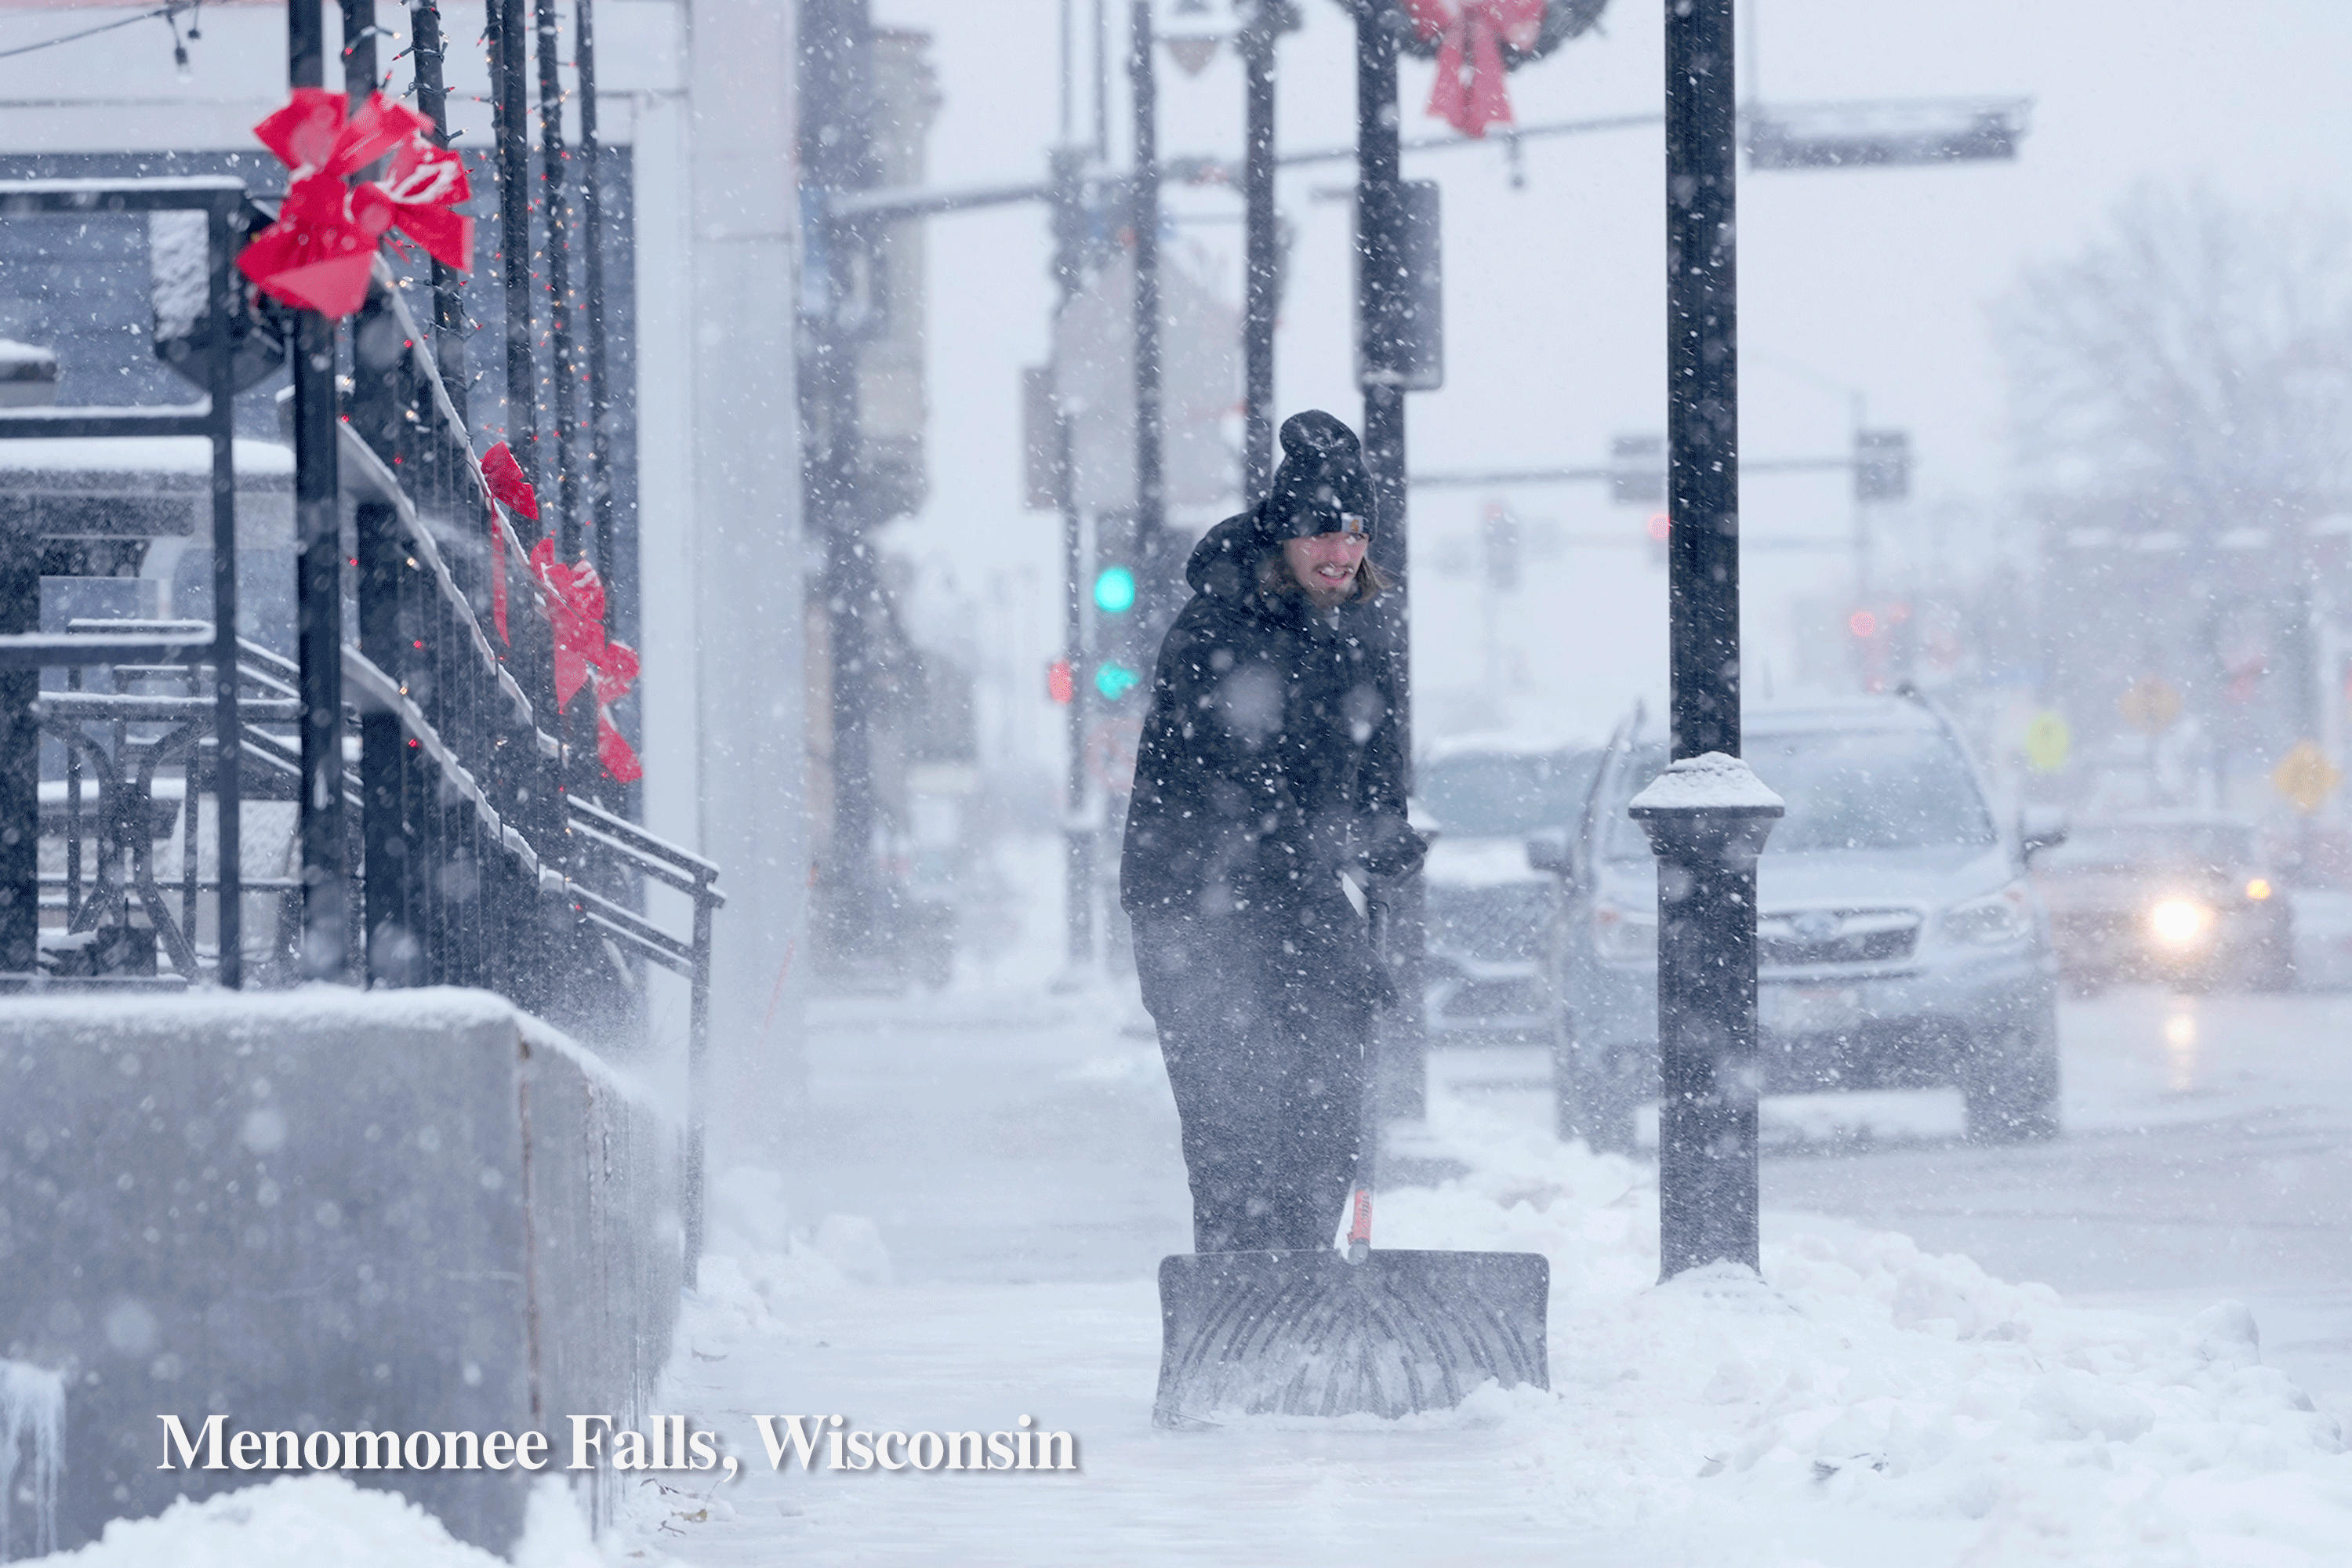 A person shovels snow in Menomonee Falls, Wisconsin contrast with a person along the shoreline in Long Beach.